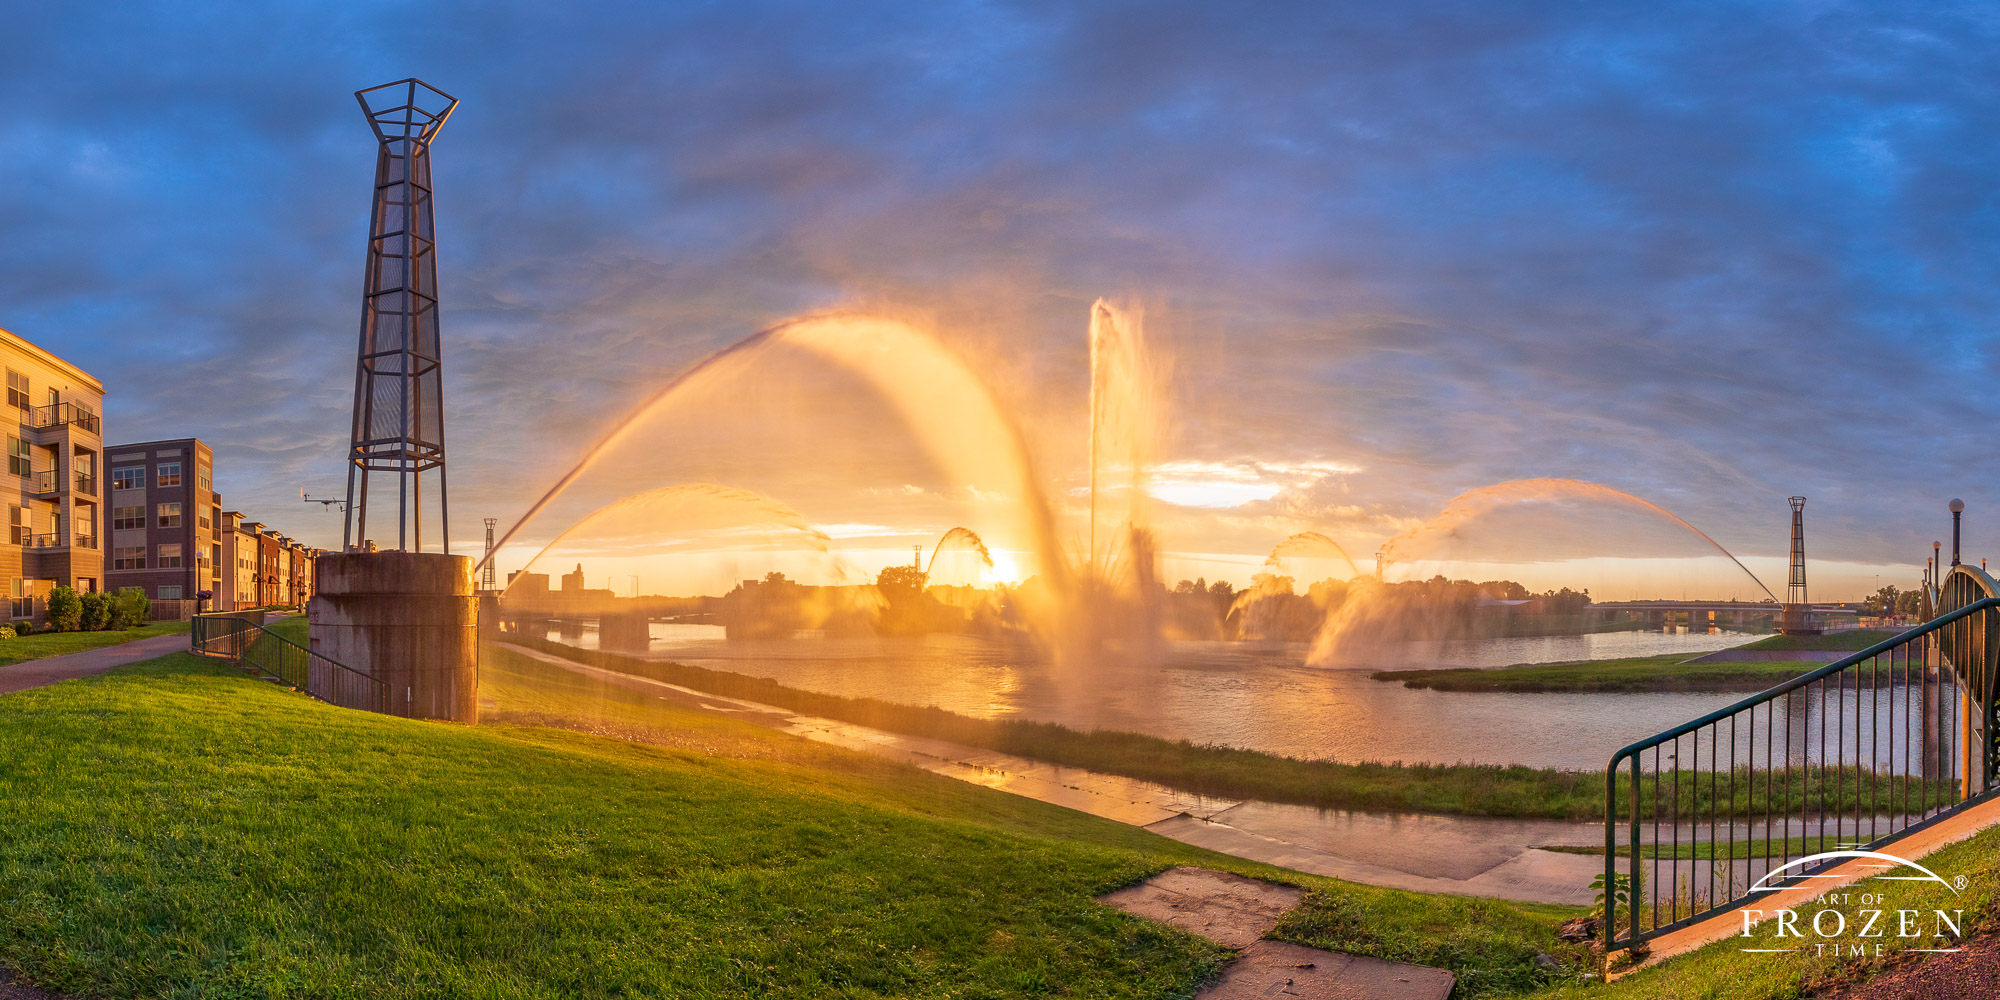 Dayton Ohio’s Fountain of Light erupts during a sunset where the sun peaks through the overcast sky and warmly illuminates the fountain spray on this summer evening